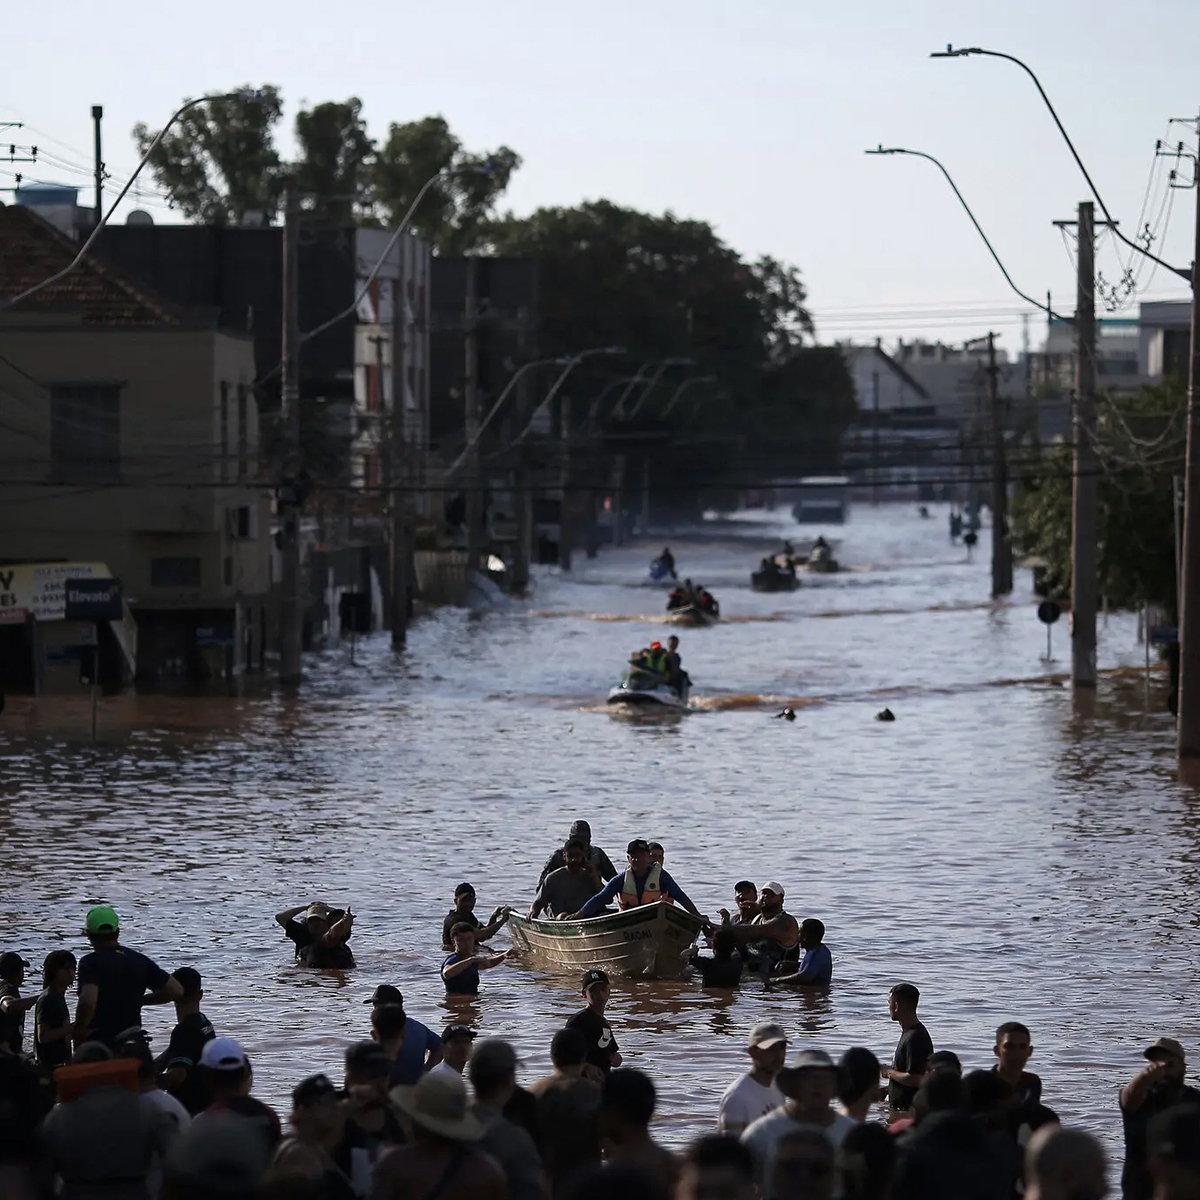 Facing the worst flooding in recent memory, Rio Grande do Sul is in urgent need of support and relief. Nearly 1.5 million people have been affected by the disaster, including at least 105 people who have lost their lives, another 130 still missing, and over 230,000 displaced from…